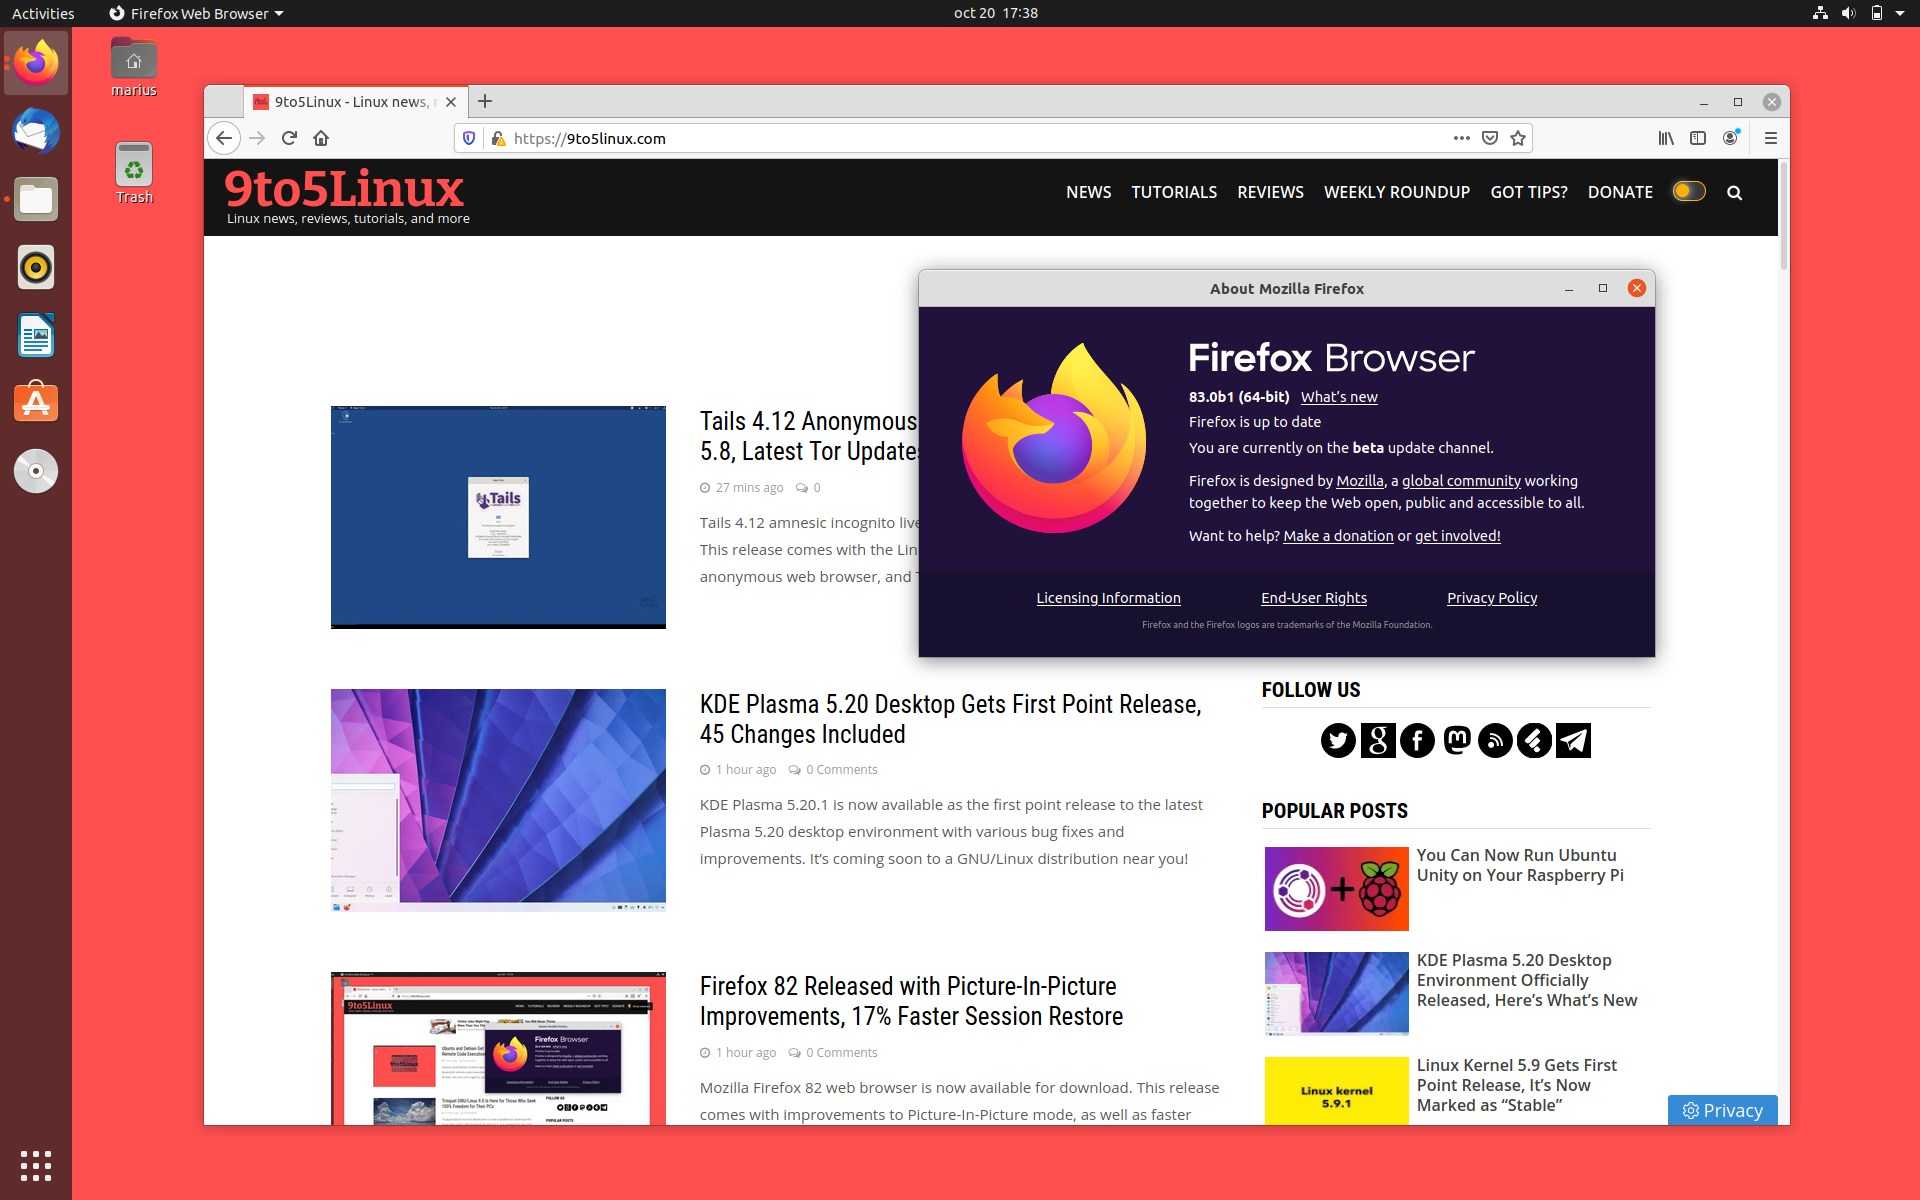 Firefox 83 Enters Beta with HTTPS-Only Mode, WebRender Support for Intel Gen12 GPUs